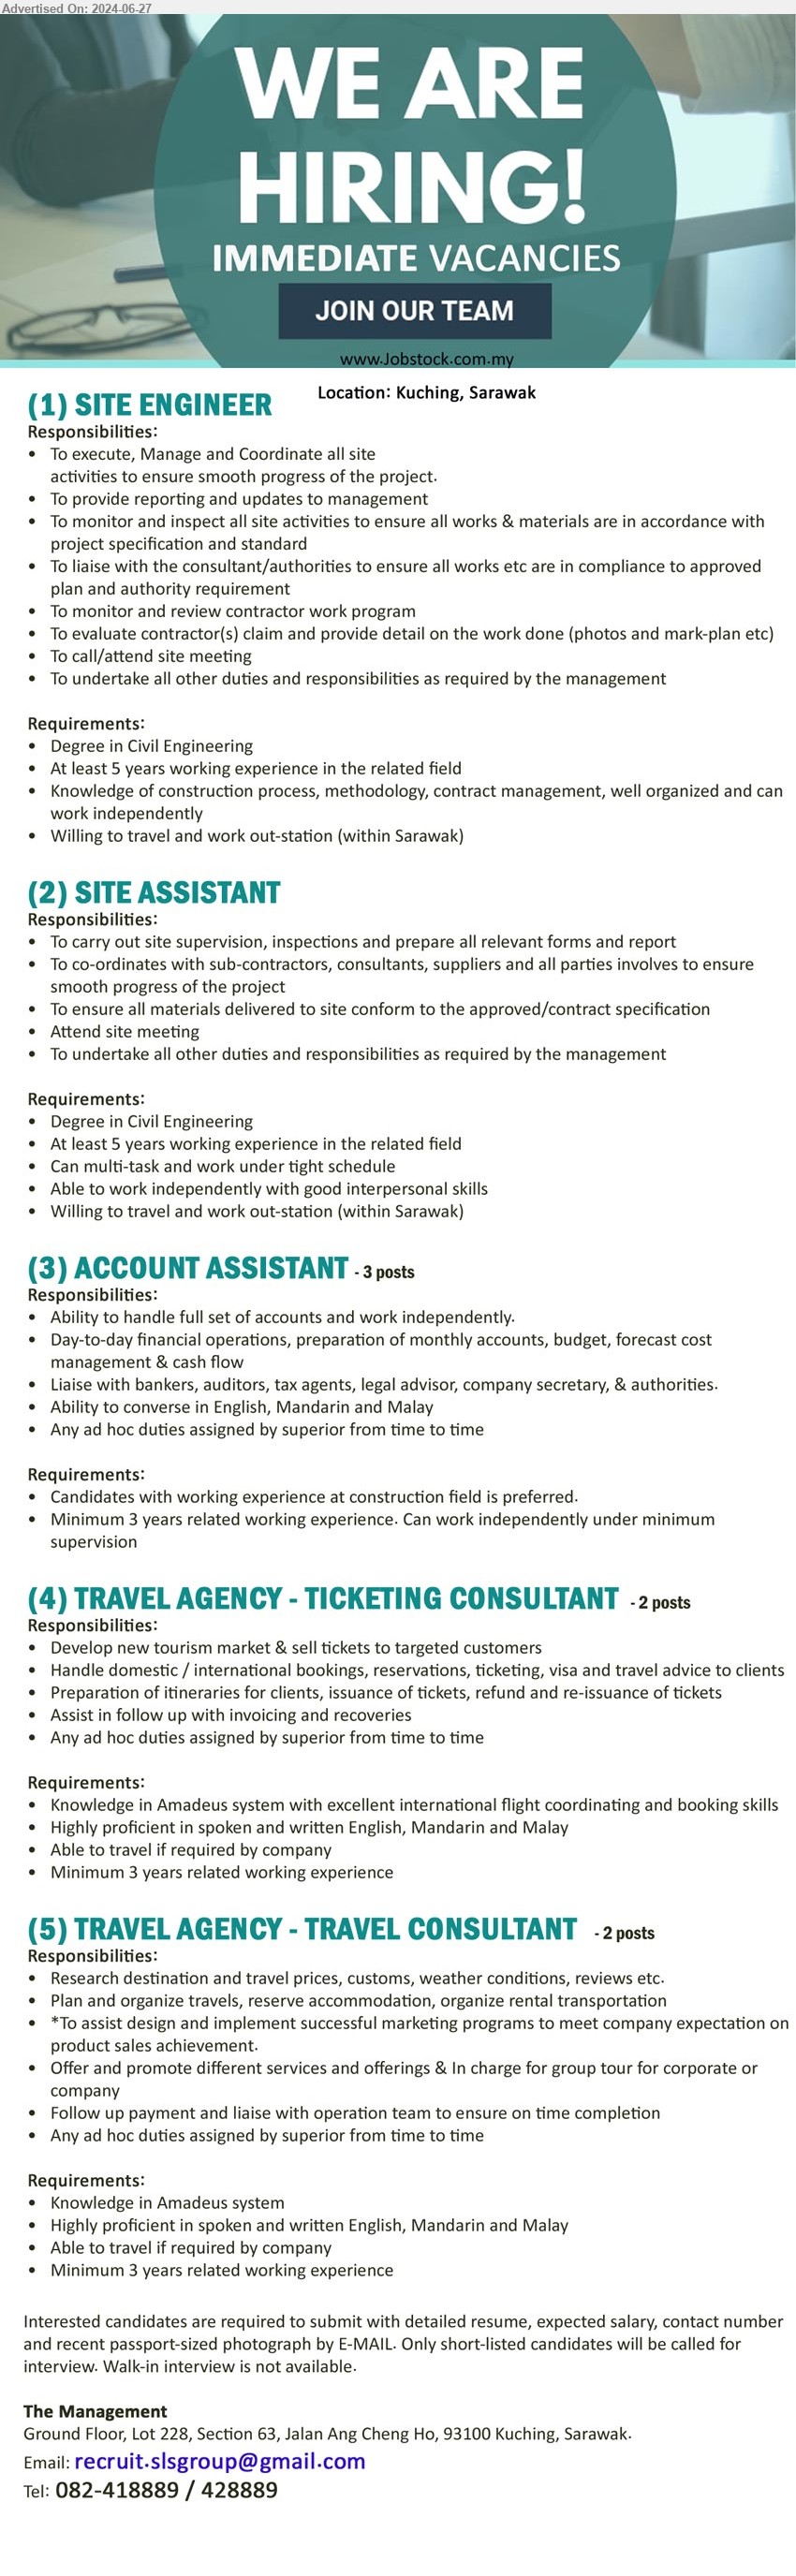 ADVERTISER - 1. SITE ENGINEER (Kuching), Degree in Civil Engineering, At least 5 years working experience,...
2. SITE ASSISTANT (Kuching), Degree in Civil Engineering, At least 5 years working experience,...
3. ACCOUNT ASSISTANT (Kuching), Candidates with working experience at construction field is preferred, 3 yrs. exp.,...
4. TRAVEL AGENCY - TICKETING CONSULTANT (Kuching), Knowledge in Amadeus system with excellent international flight coordinating and booking skills,...
5. TRAVEL AGENCY - TRAVEL CONSULTANT   (Kuching), Knowledge in Amadeus system, Minimum 3 years related working experience
,...
Tel: 082-418889 / 082-428889 / Email resume to ...
